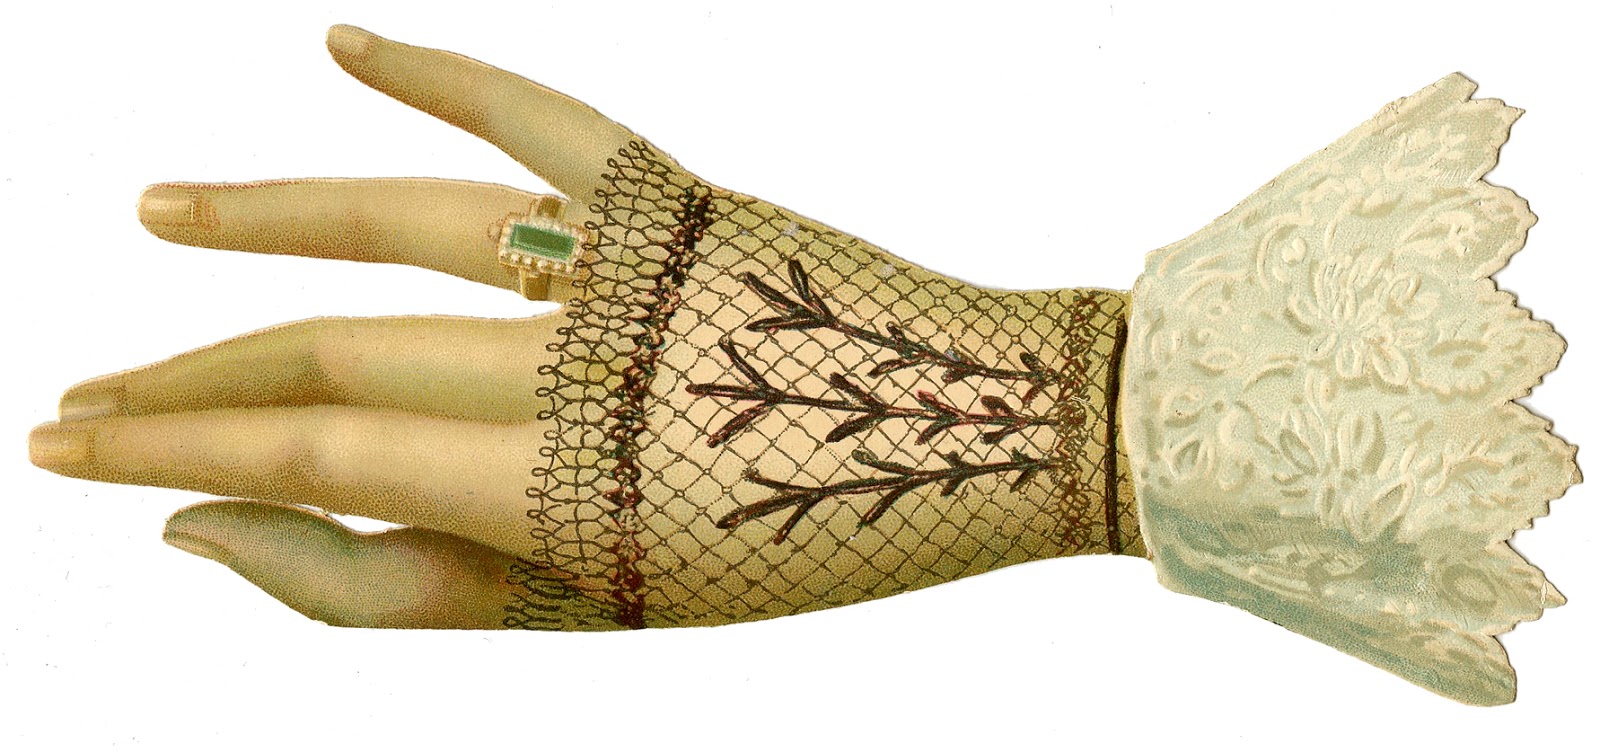 Victorian Image - Extraordinary Ladies Hand with Ring - The Graphics Fairy